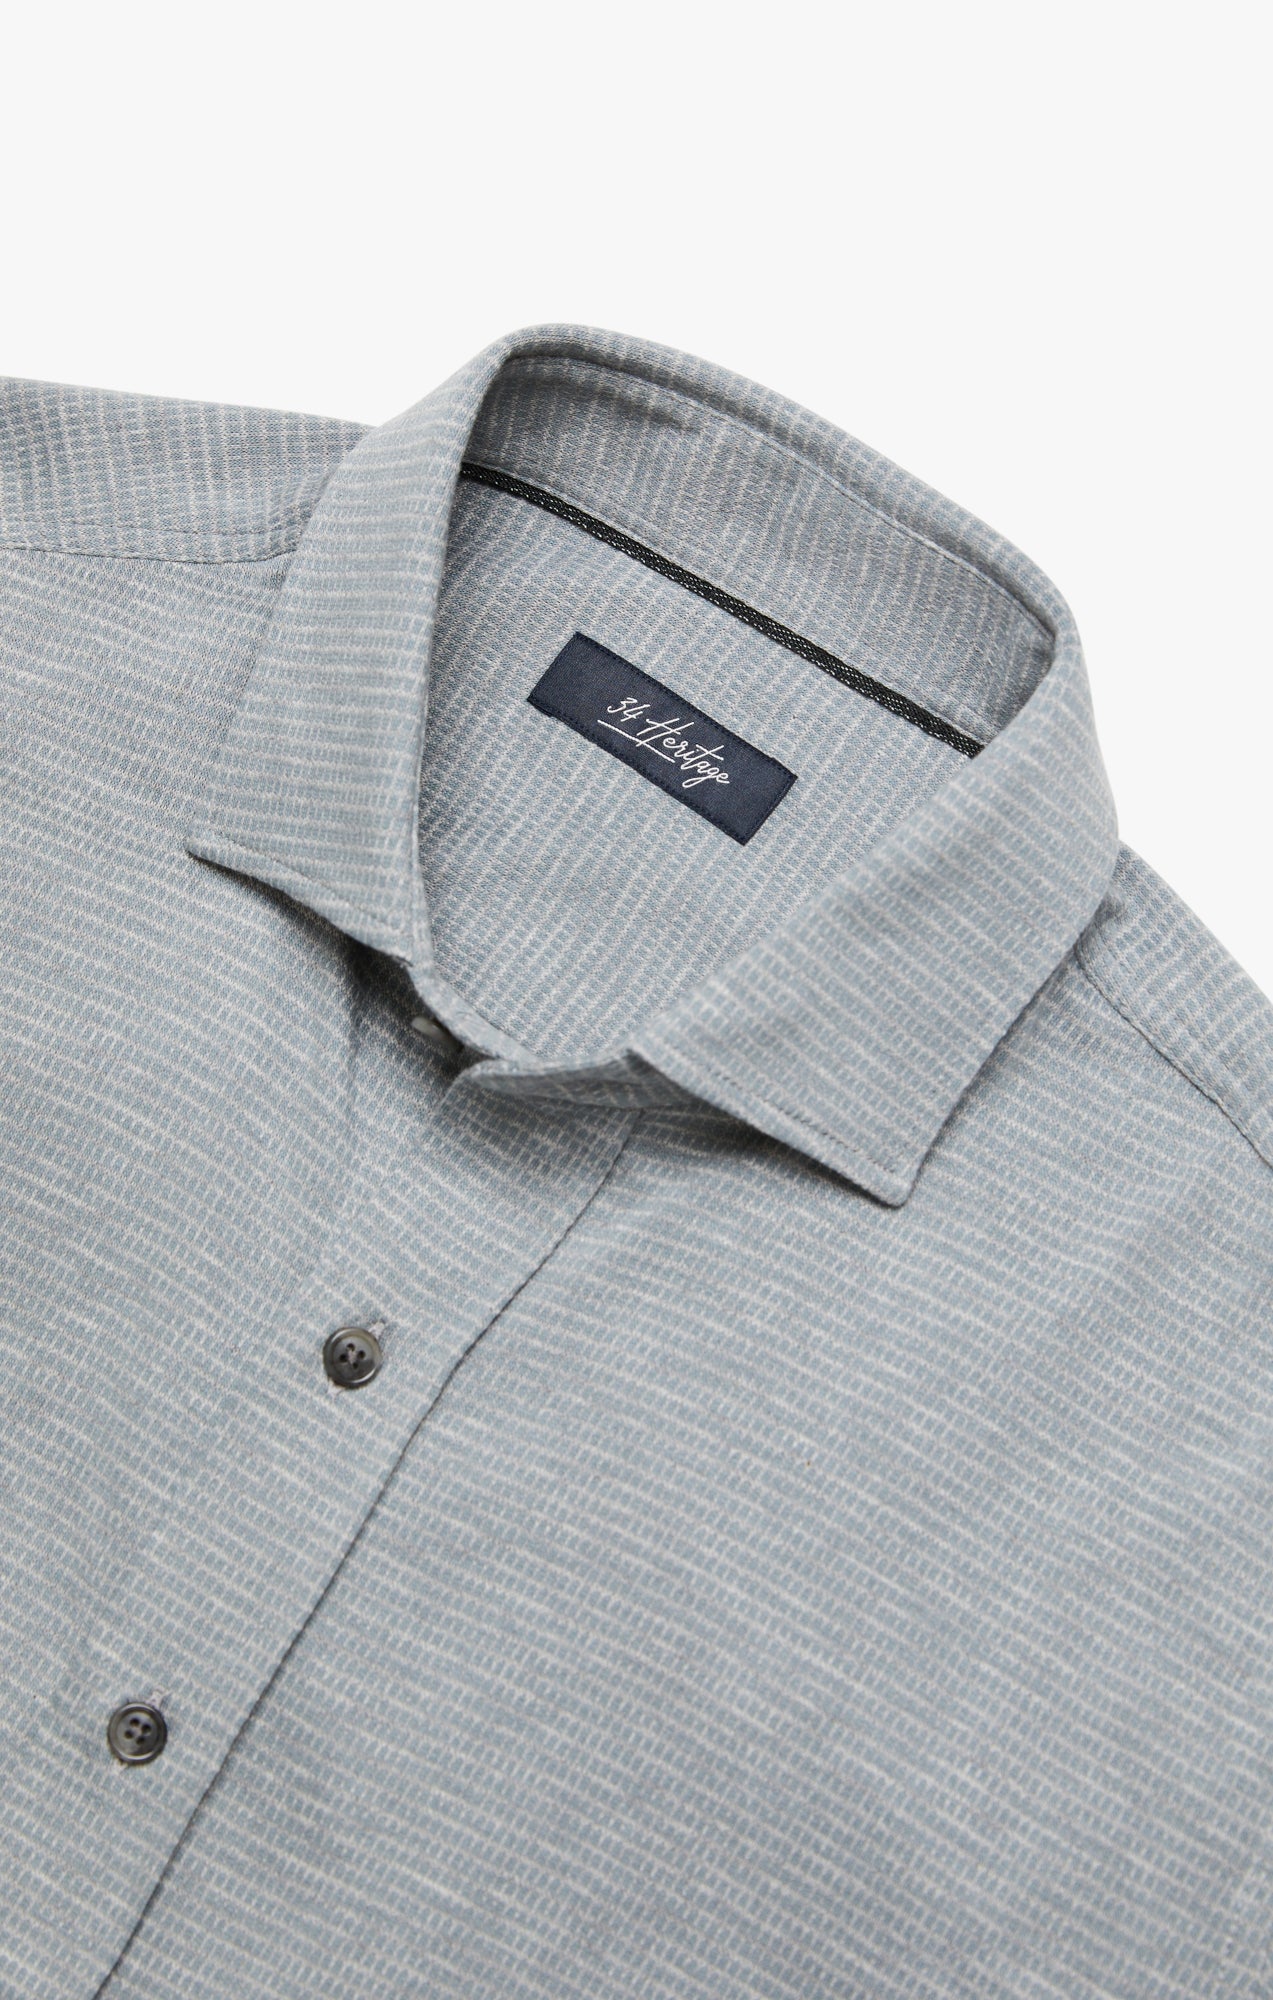 Structured Shirt In Light Grey